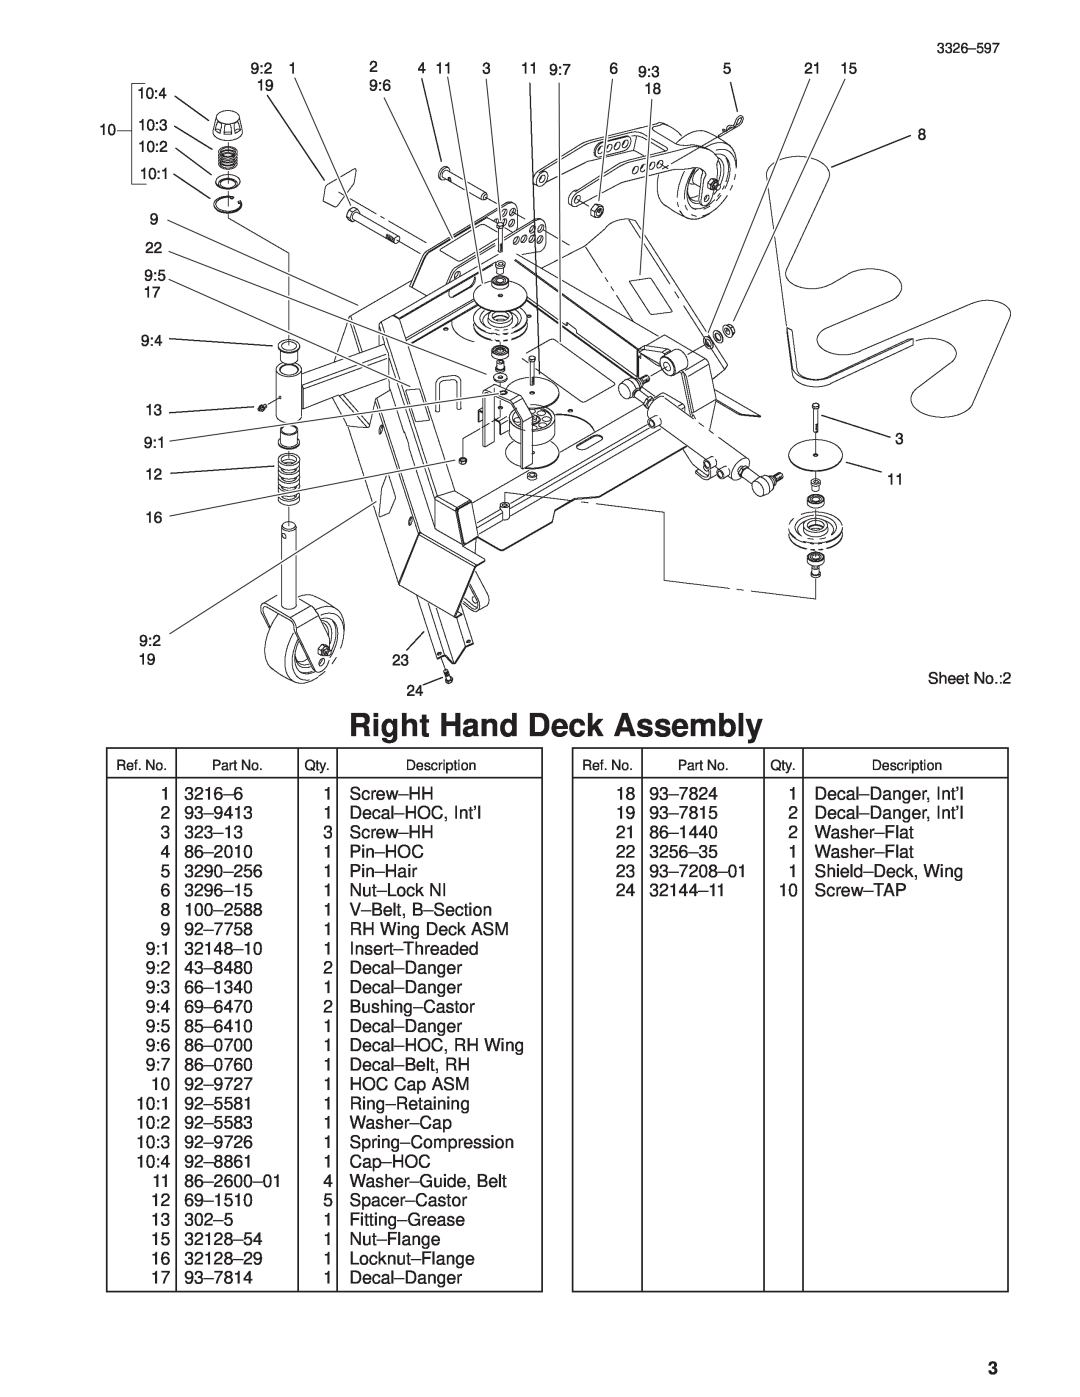 Toro 30402210000001 and Up manual Right Hand Deck Assembly, Sheet No.2 